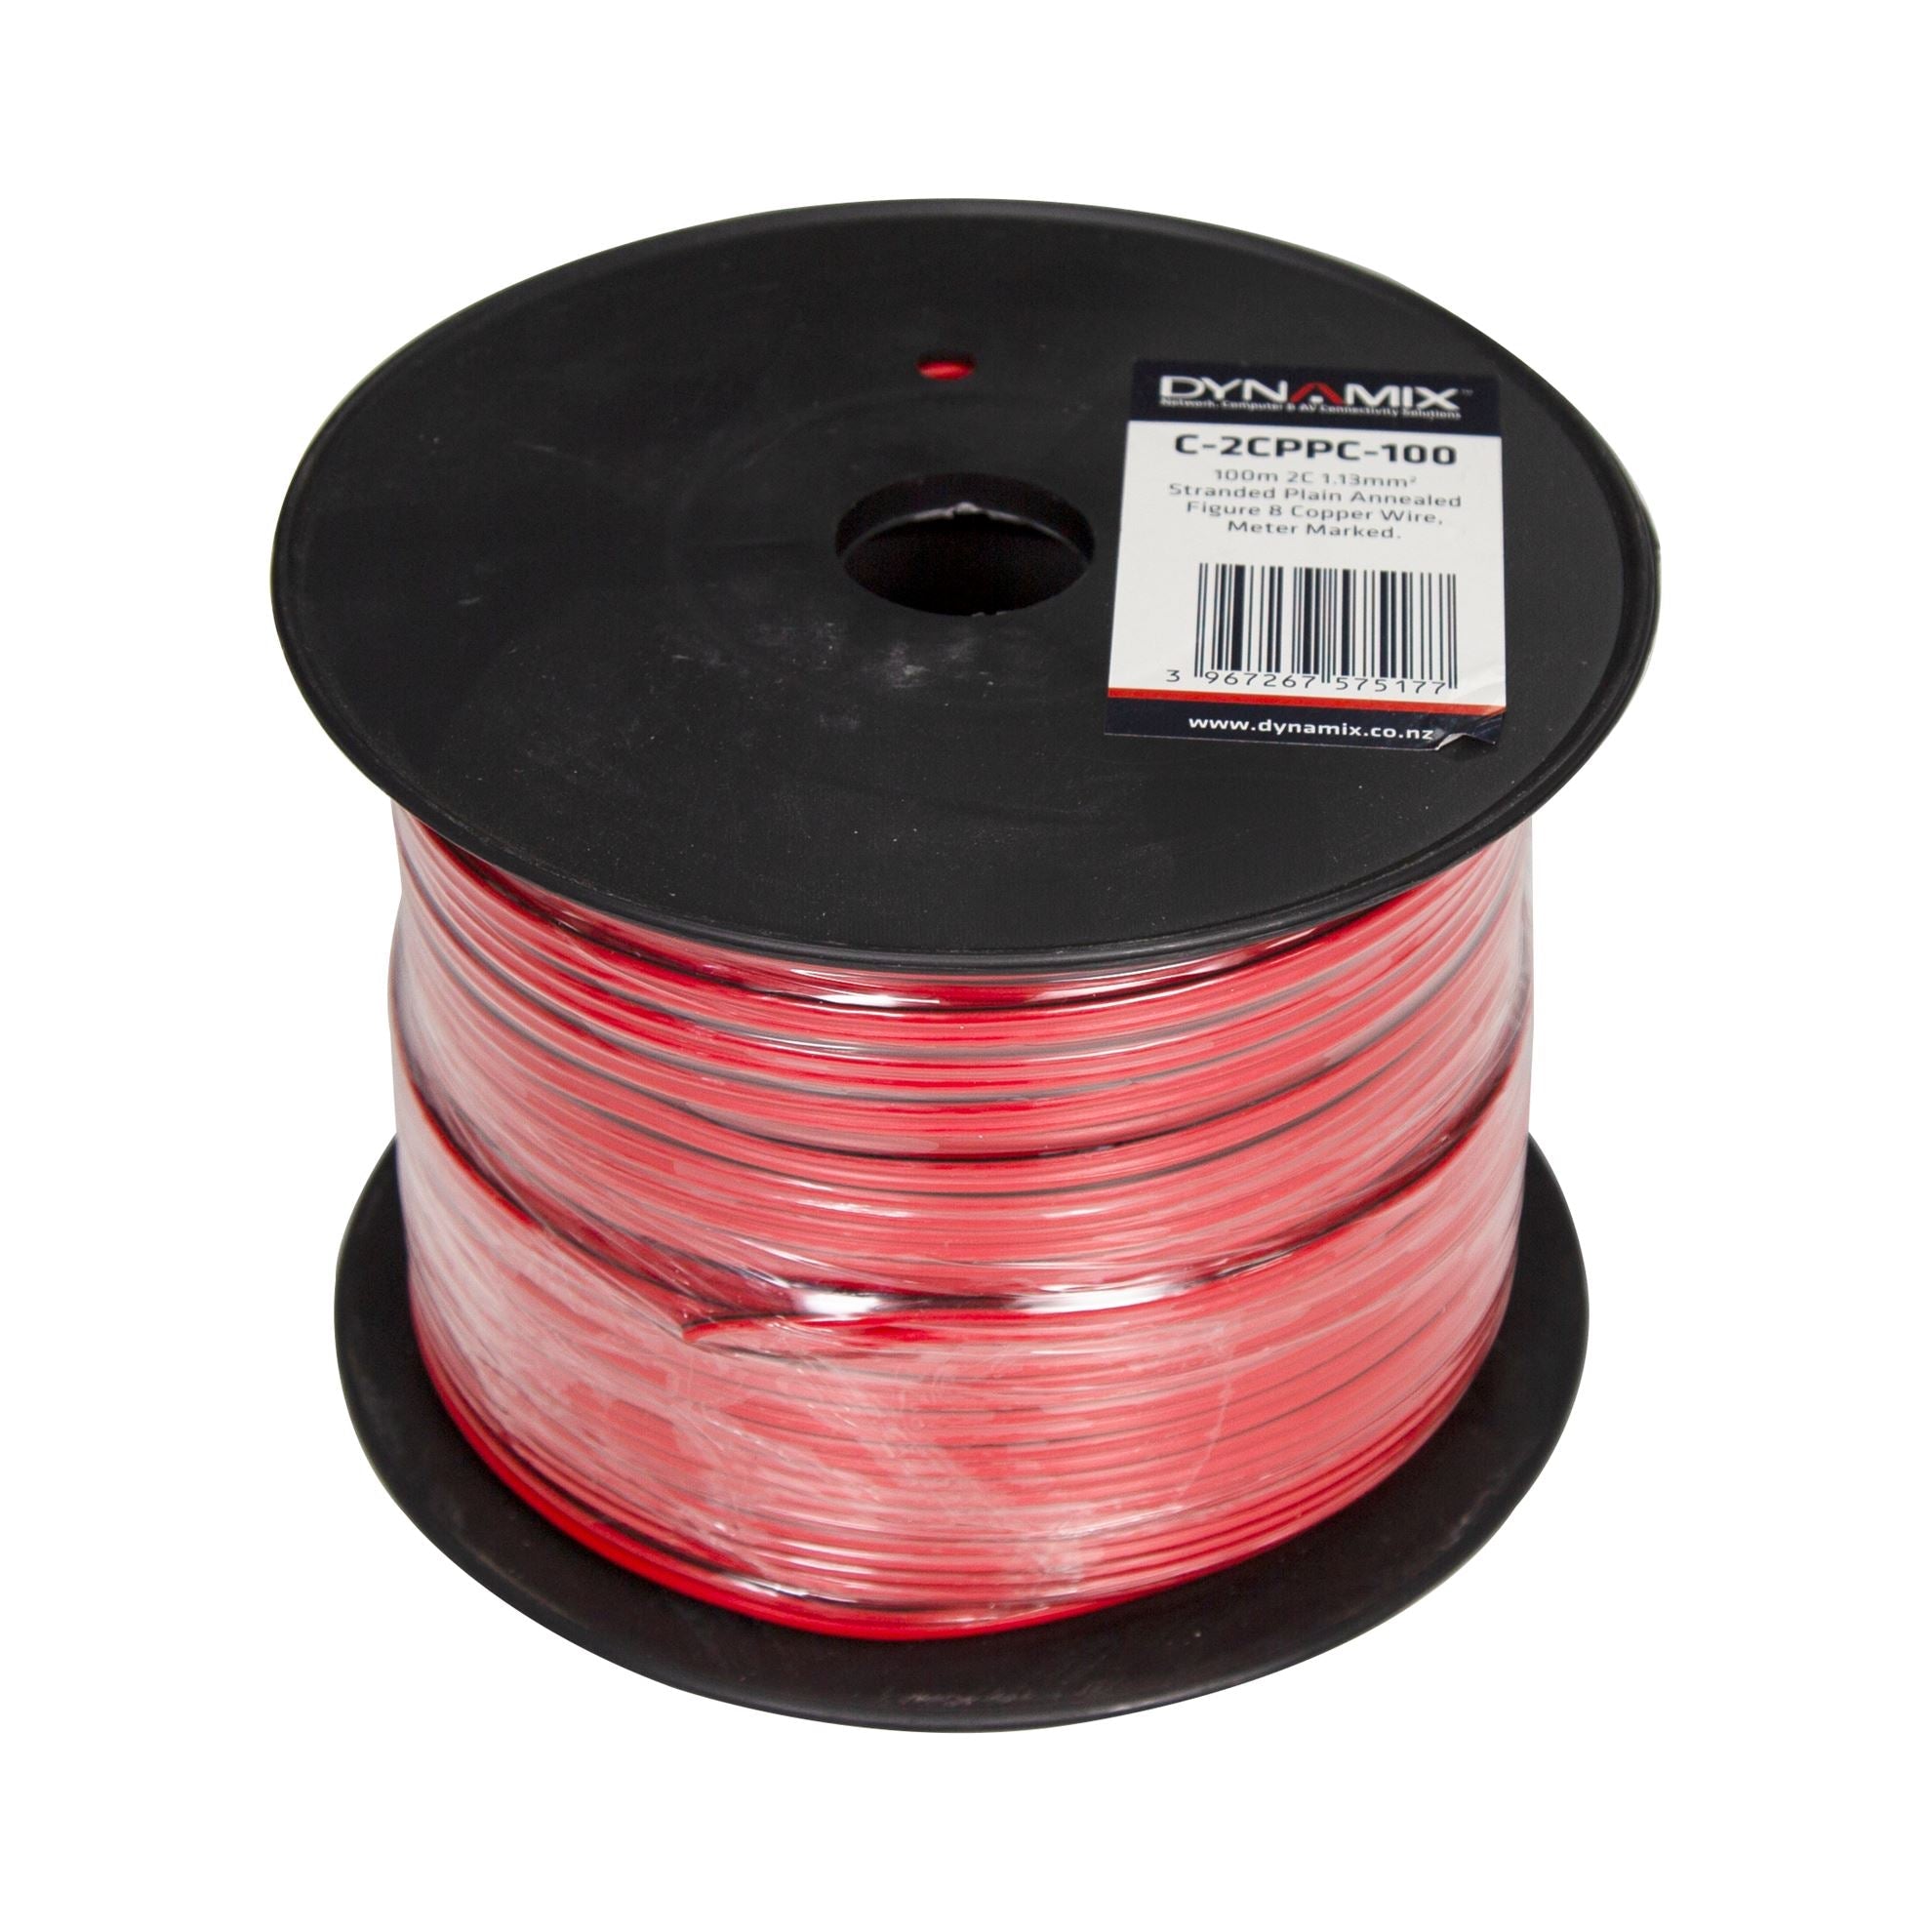 DYNAMIX_100m_2x_Core_1.13mm_Bar_Copper,_Red/Black_Trace_Figure_8x_Parallel_Power_Cable,_Meter_Marked,_16/03_x_2_CORE_V-90_50V_AC/120V